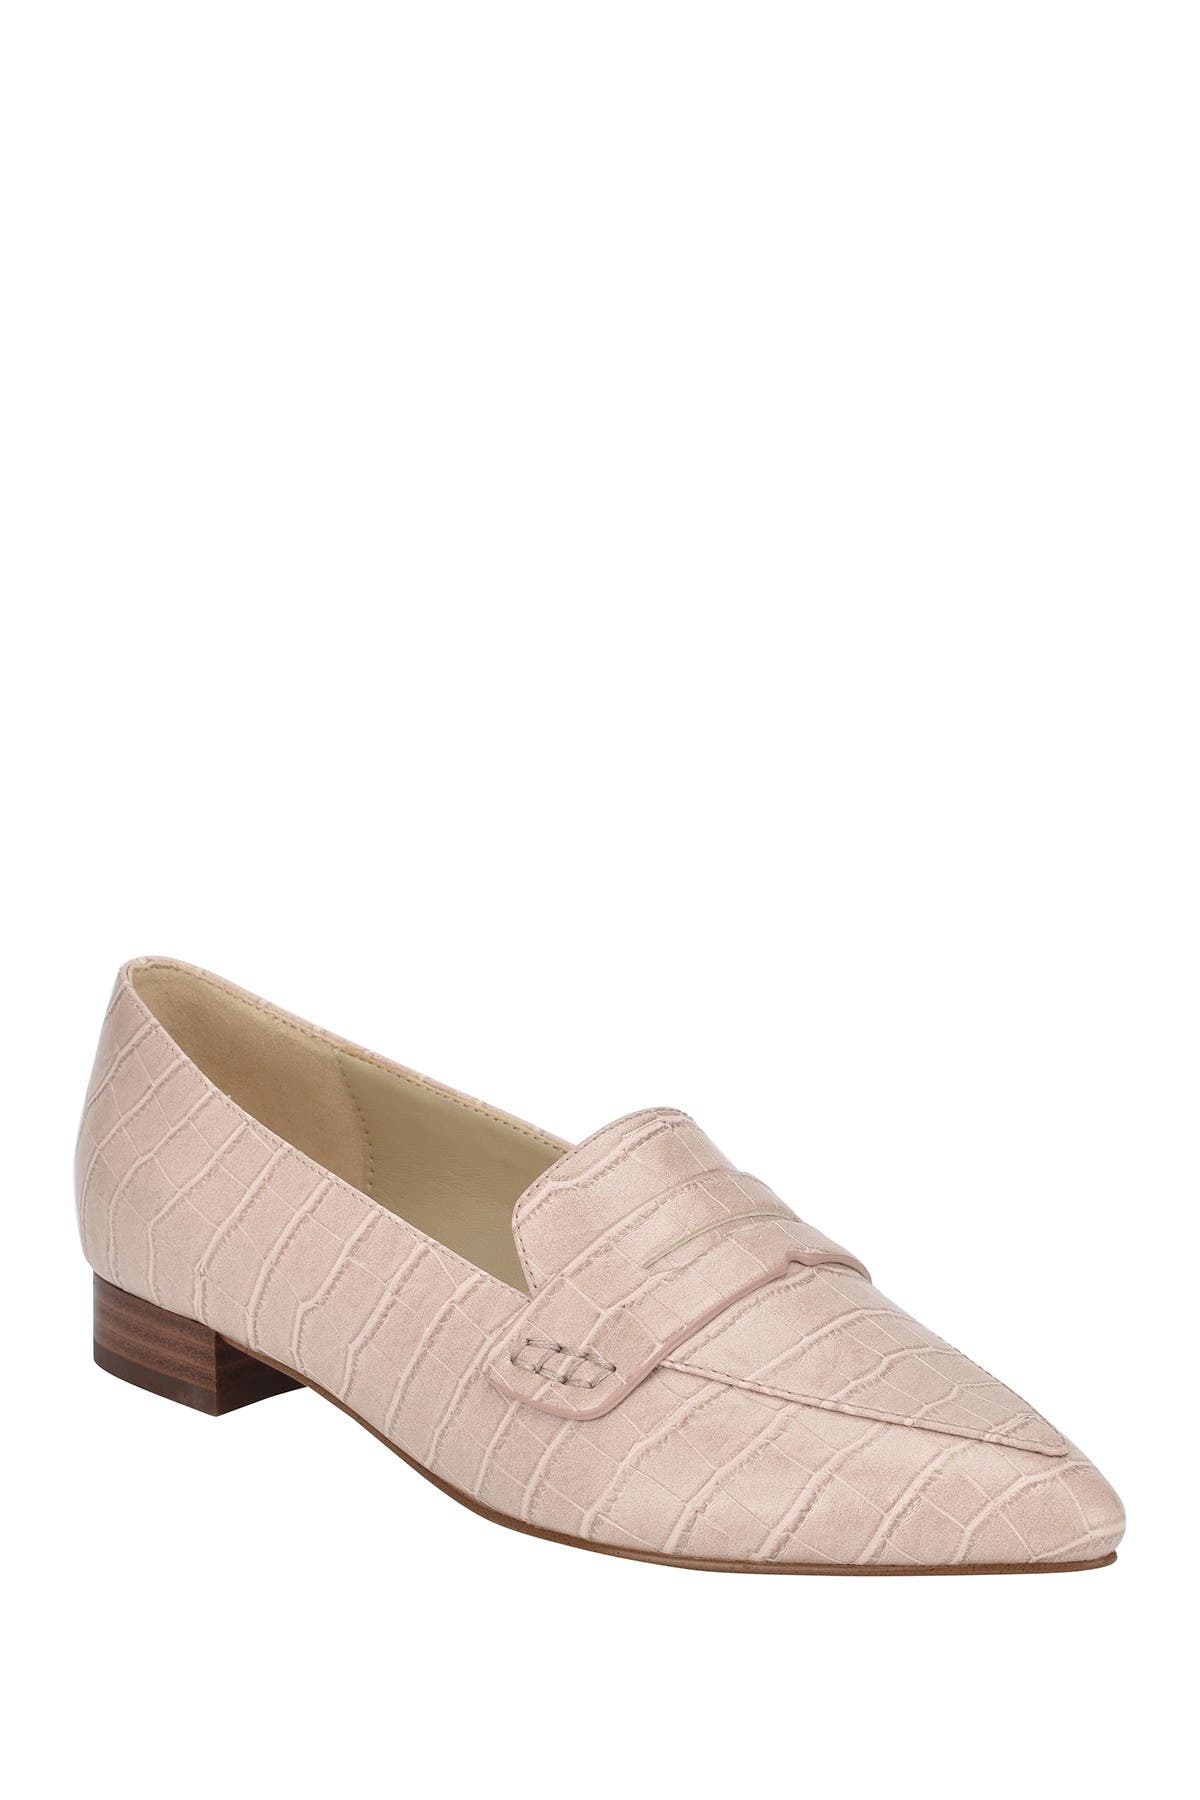 Marc Fisher Feud Pointed Toe Embossed Loafer In Light/pastel Pink